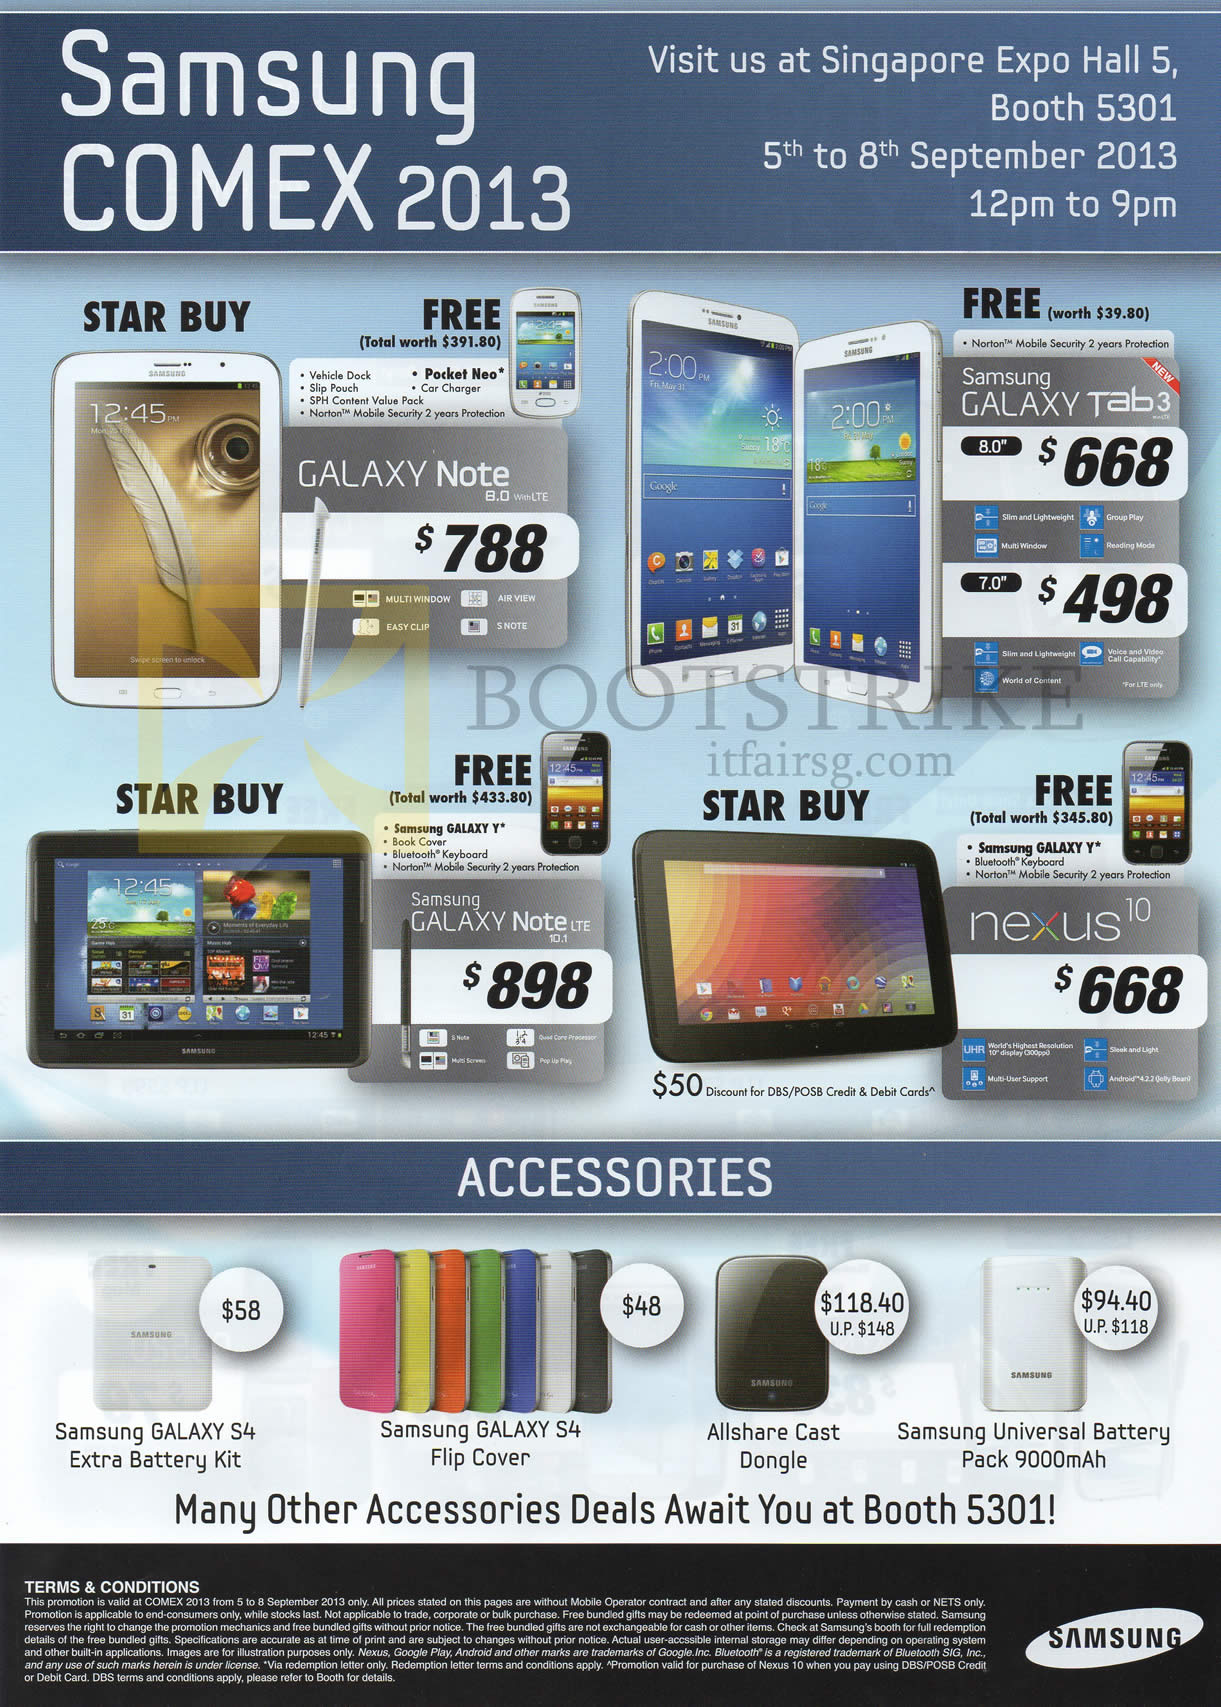 COMEX 2013 price list image brochure of Samsung Tablets Galaxy Note 8.0, Tab 3 8.0, Note 10.1 LTE, Nexus 10, Accessories Cover Battery Case